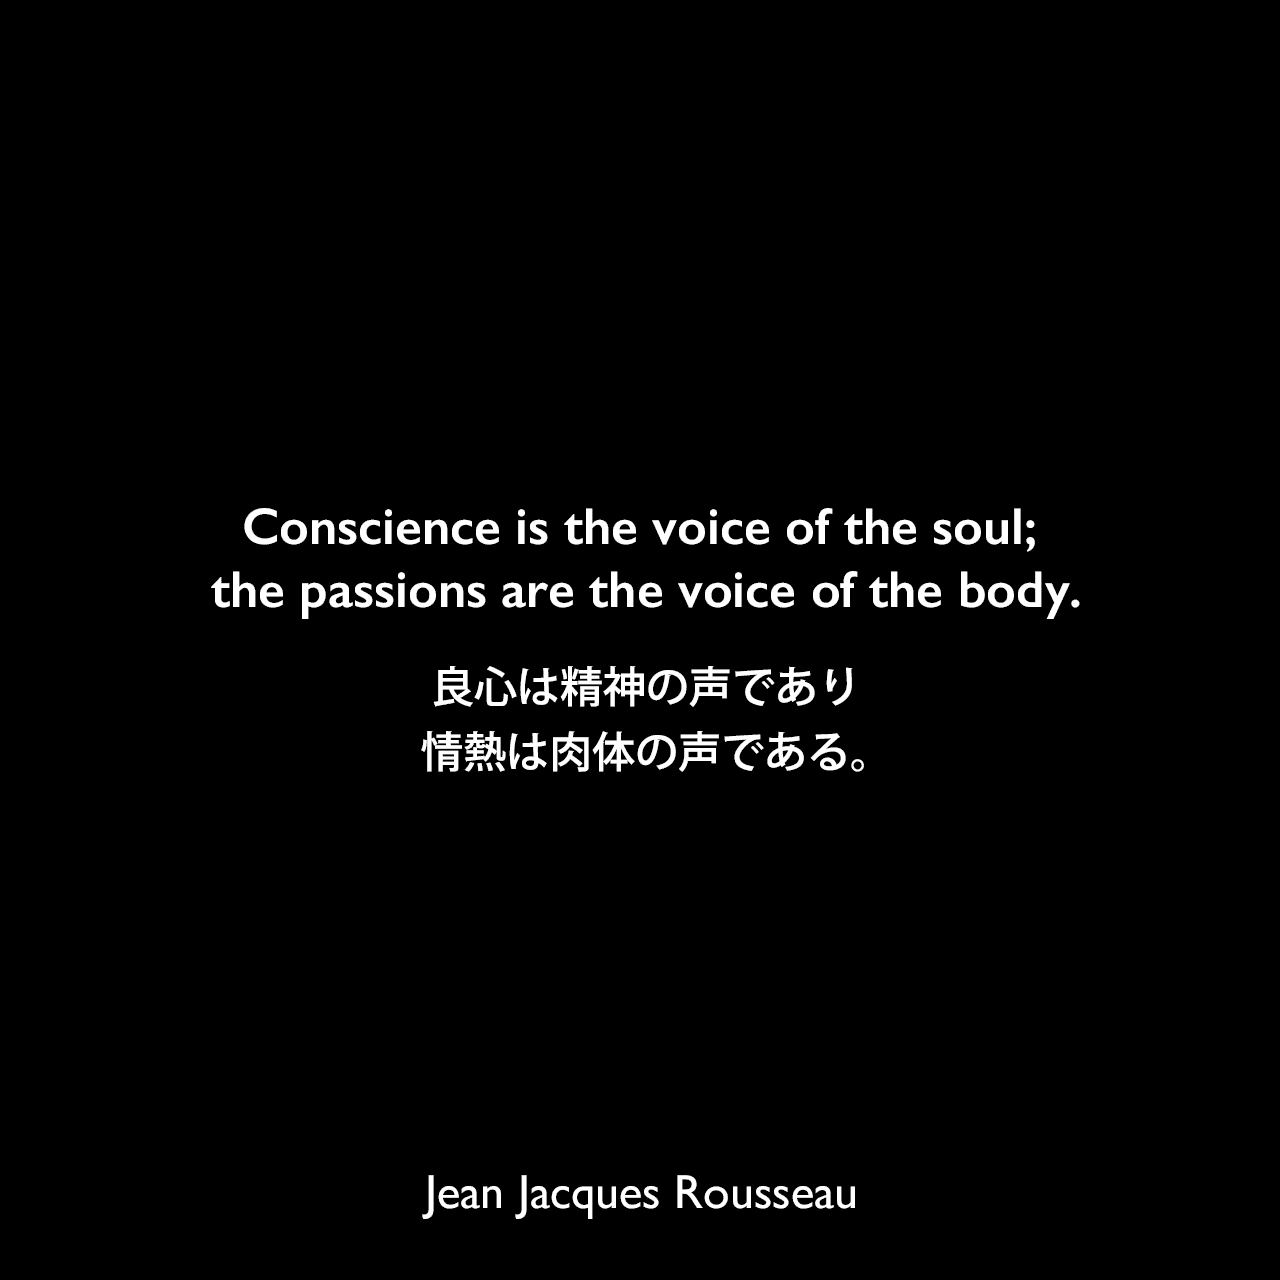 Conscience is the voice of the soul; the passions are the voice of the body.良心は精神の声であり、情熱は肉体の声である。Jean Jacques Rousseau